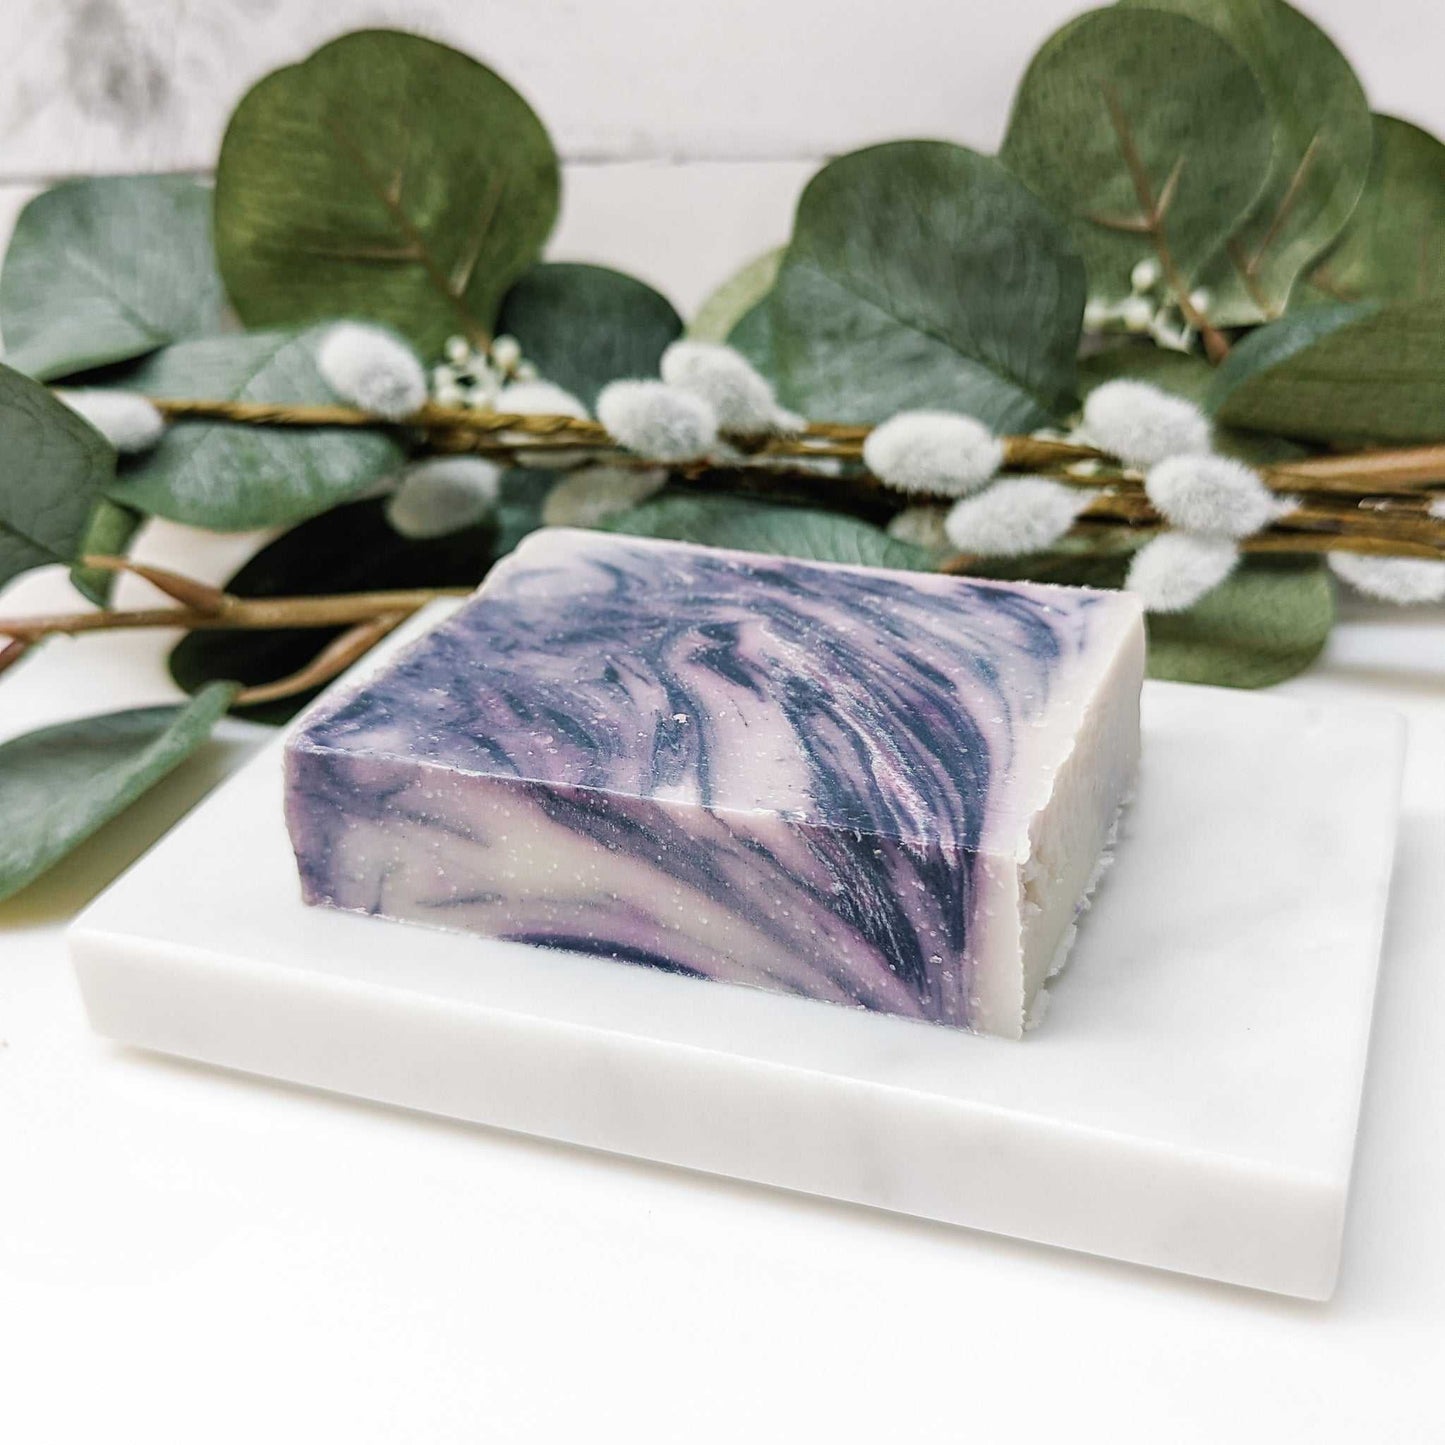 kin-hydrating and softening Coconut Lime Soap Bars from CG Pure Wash, embodying our commitment to natural skincare and nourishment